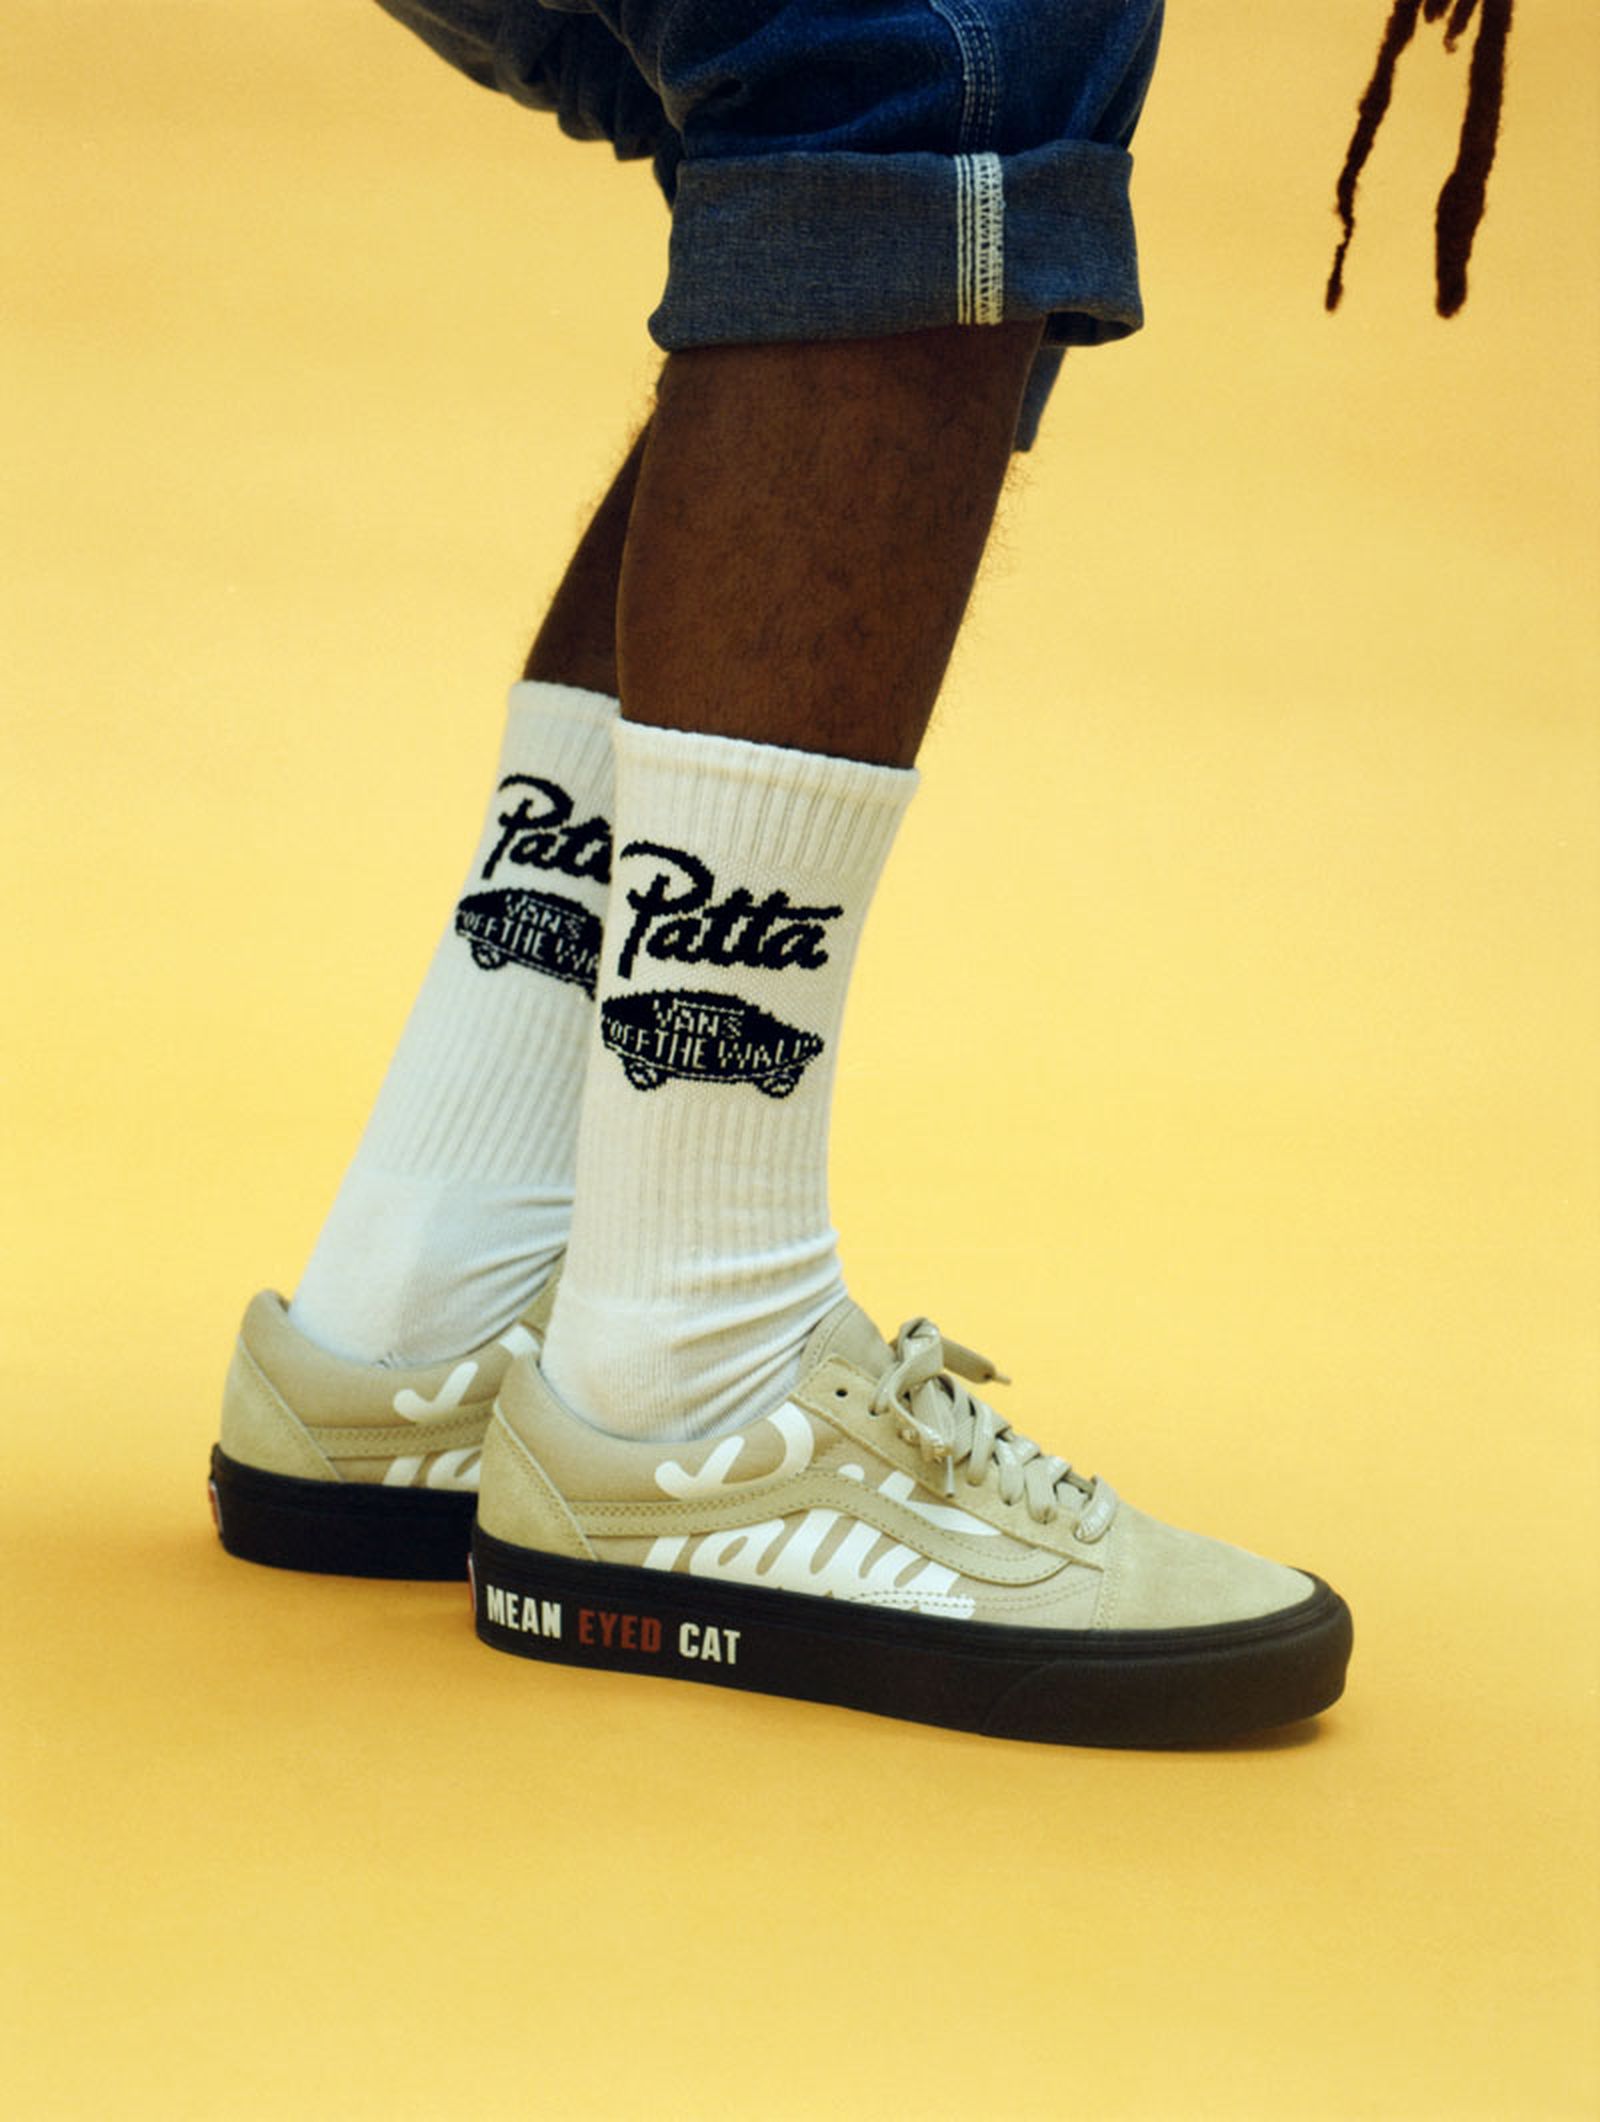 Grand afwijzing Weggelaten Patta x Vans Mean Eyed Cats Collection 2021: Official Images & Info